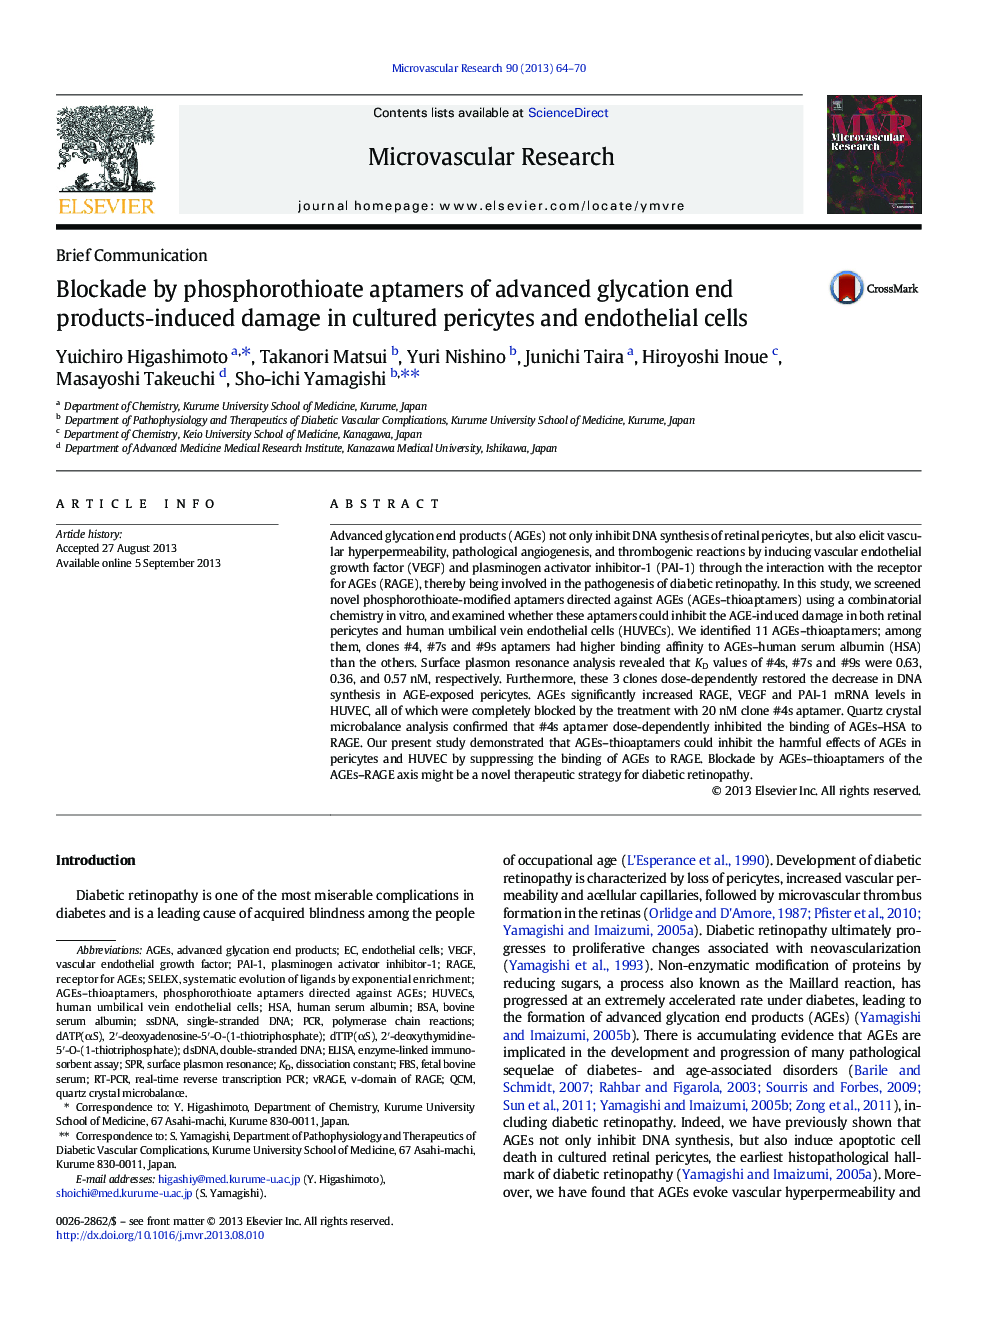 Blockade by phosphorothioate aptamers of advanced glycation end products-induced damage in cultured pericytes and endothelial cells